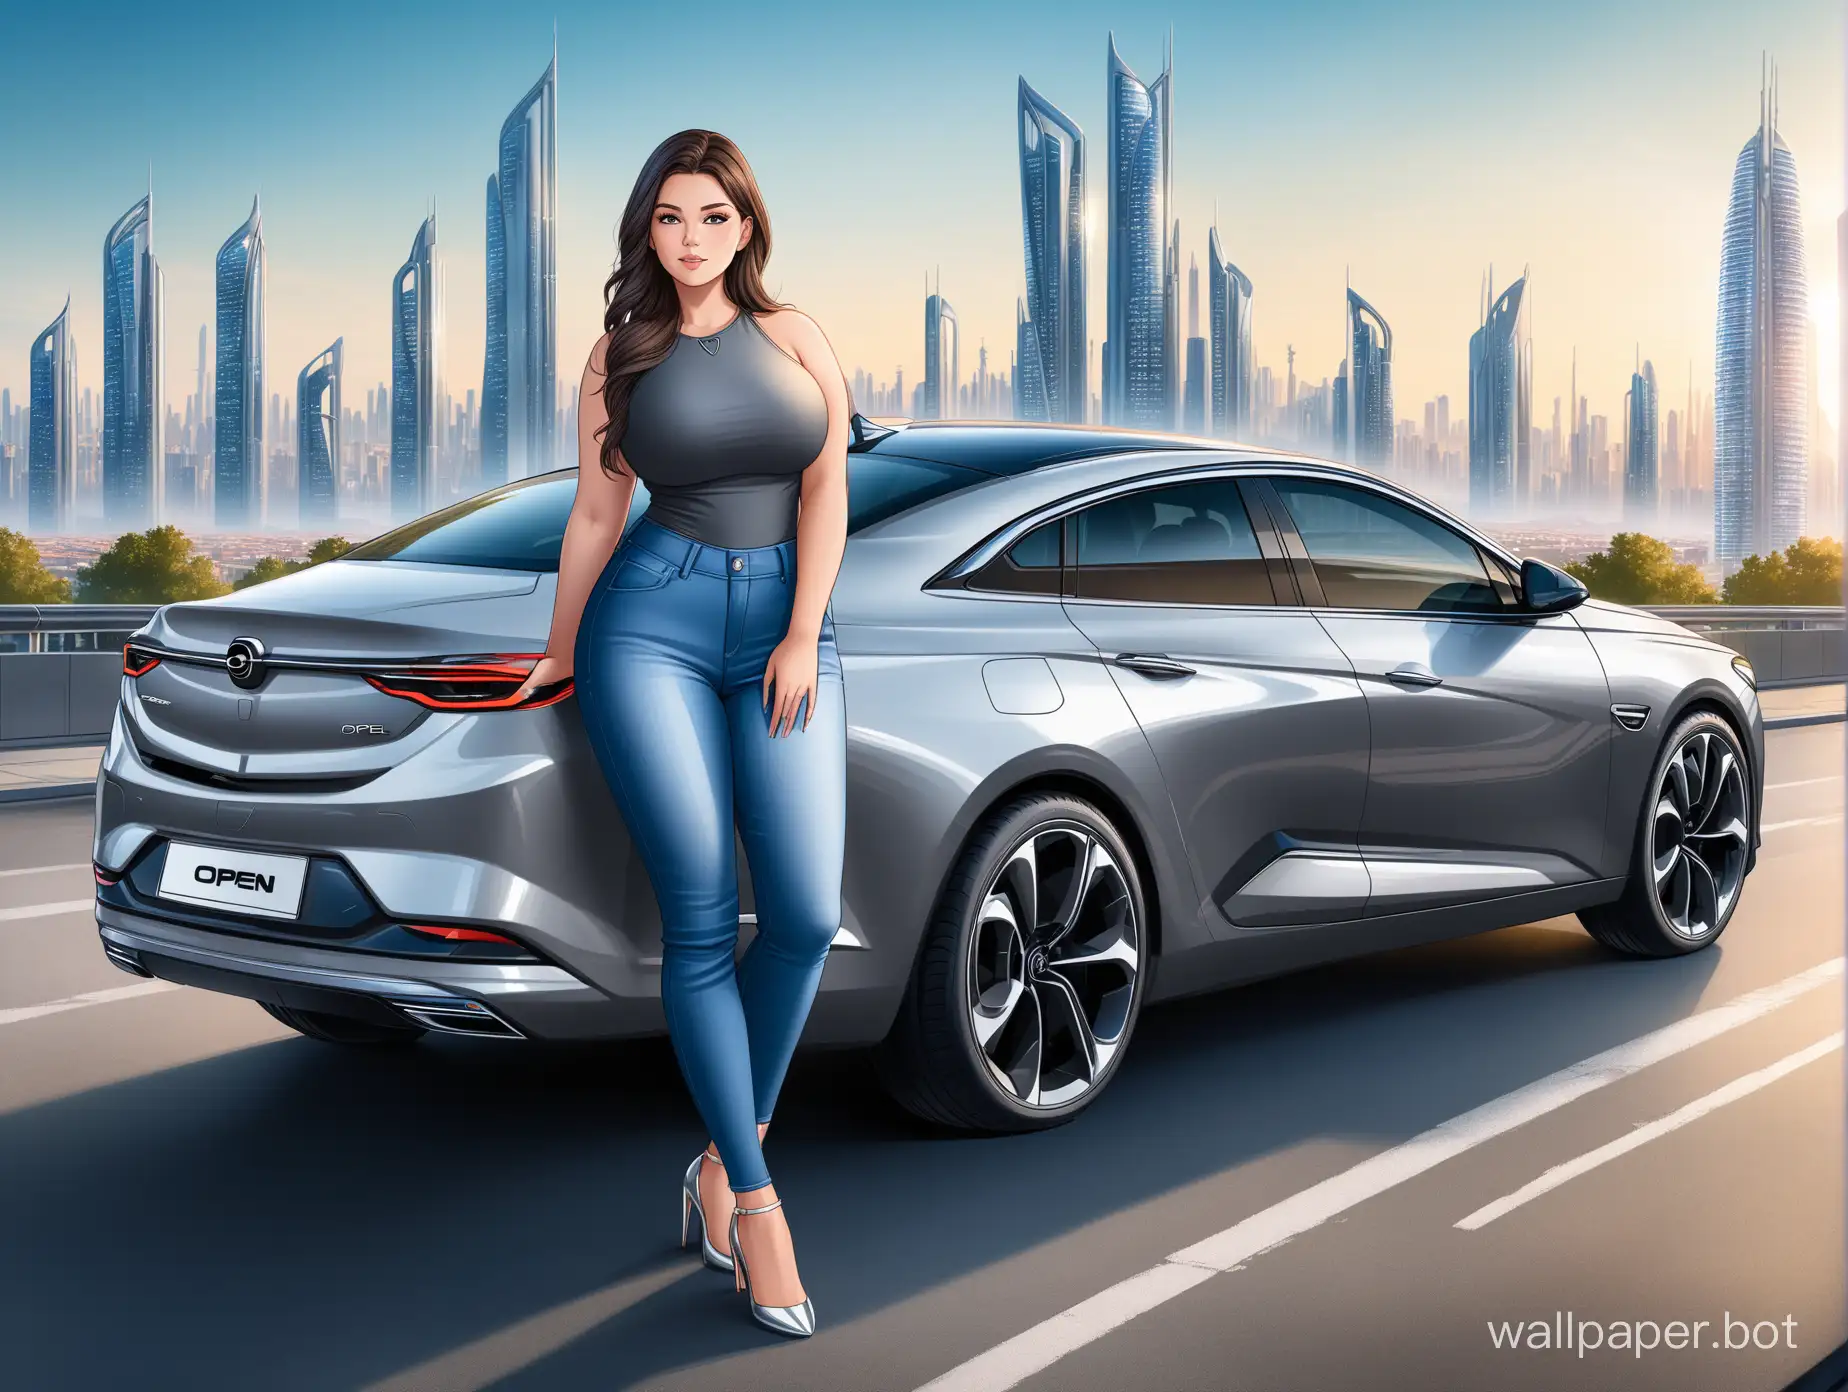 curvy brunette in jeans and high heels standing next to a opel insigna grand sport in steel color with a futuristic city in the beackground